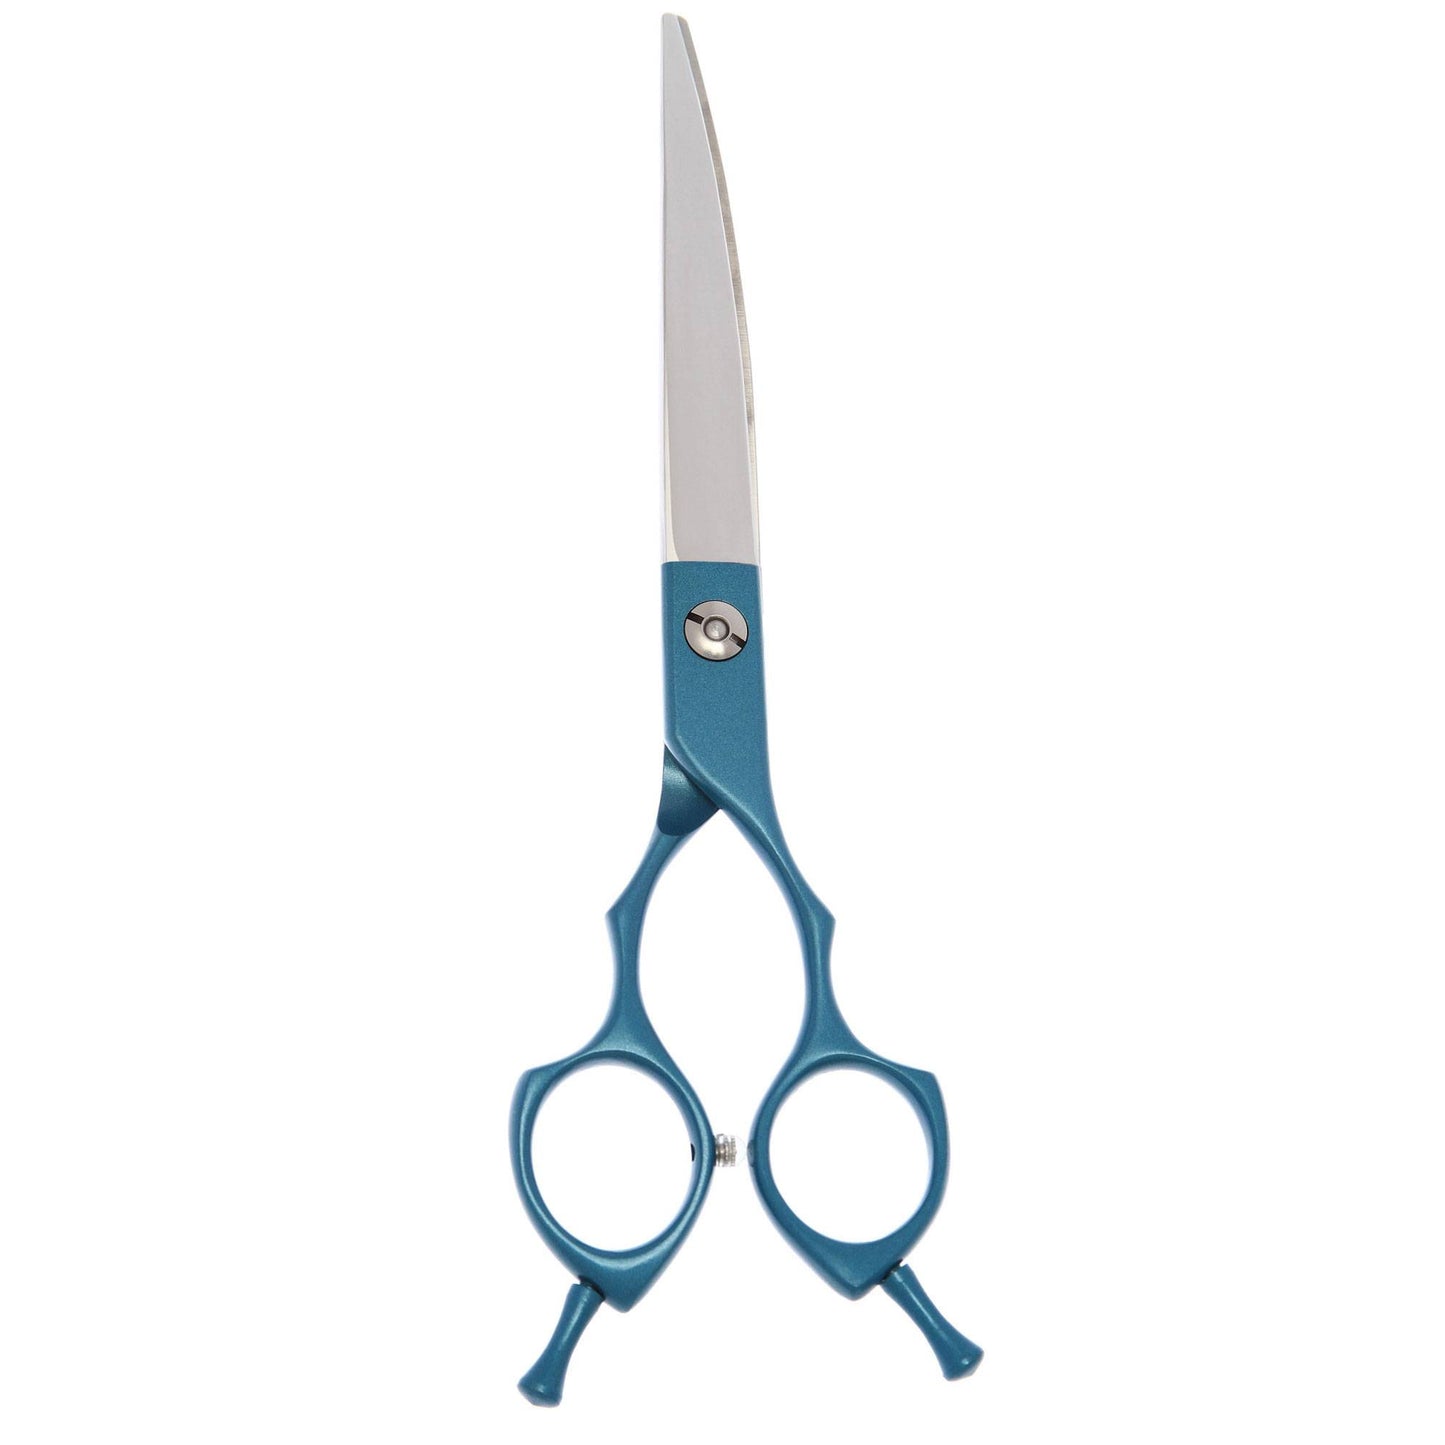 6.5" Blue Curved Asian Fusion Grooming Shears